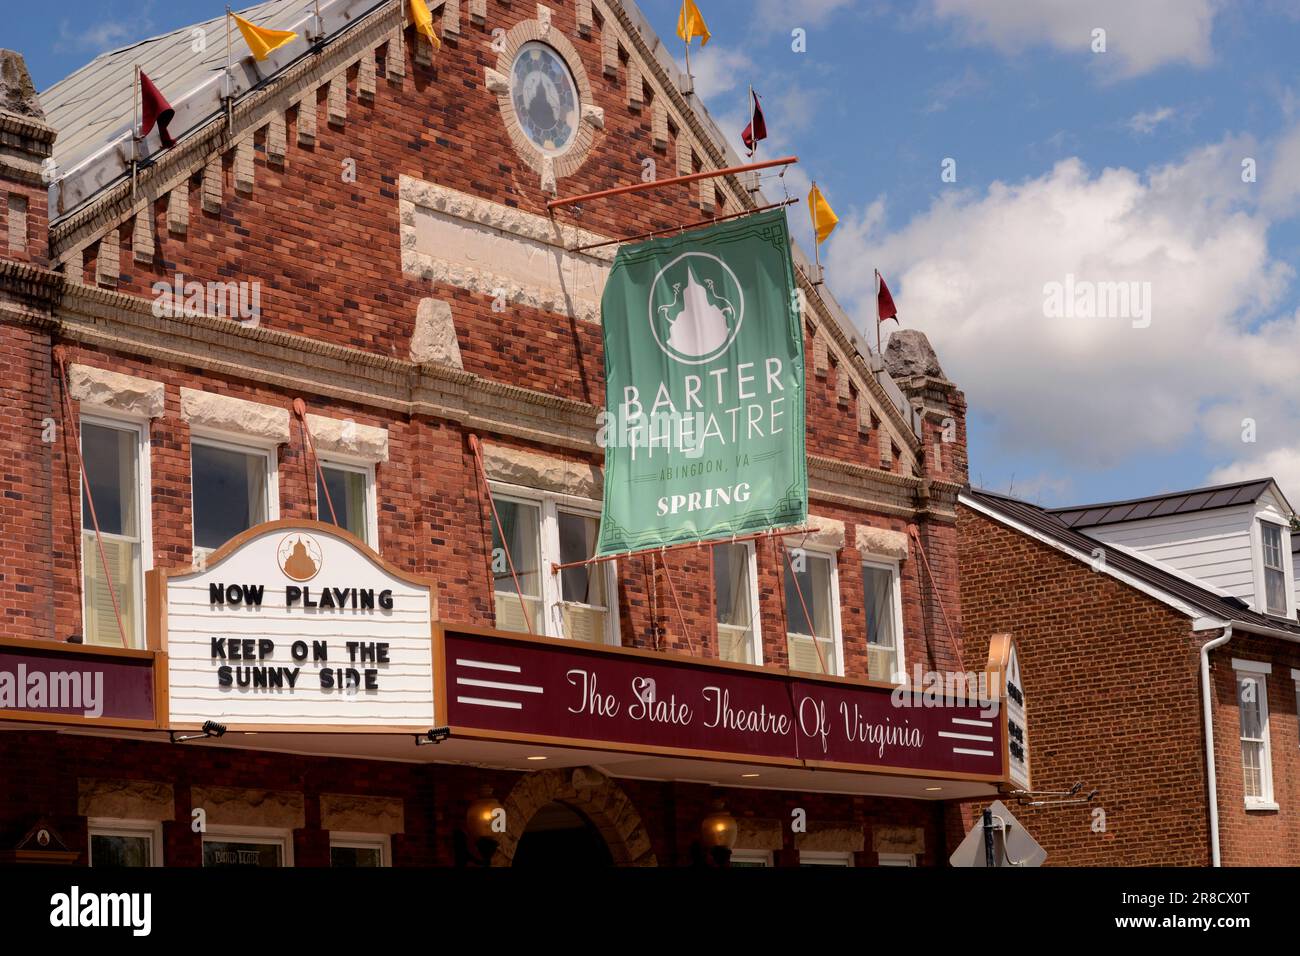 The Barter Theatre, which opened in 1933 in Abingdon, Virginia, is the longest-running professional Equity theatre in the United States. Stock Photo